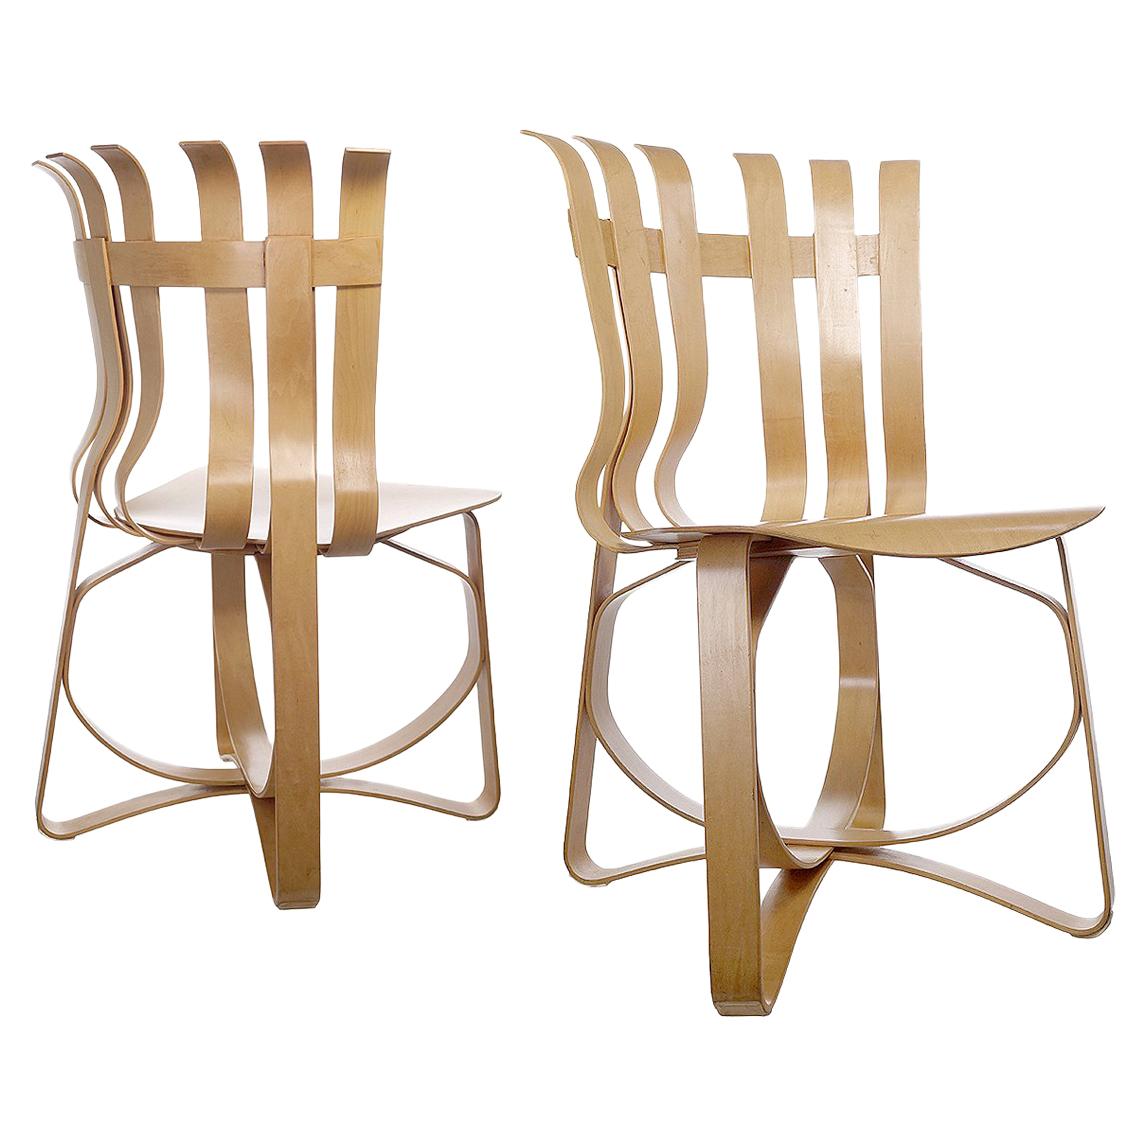 Light Wood Hat Trick Chairs by Frank Gehry for Knoll, Pair